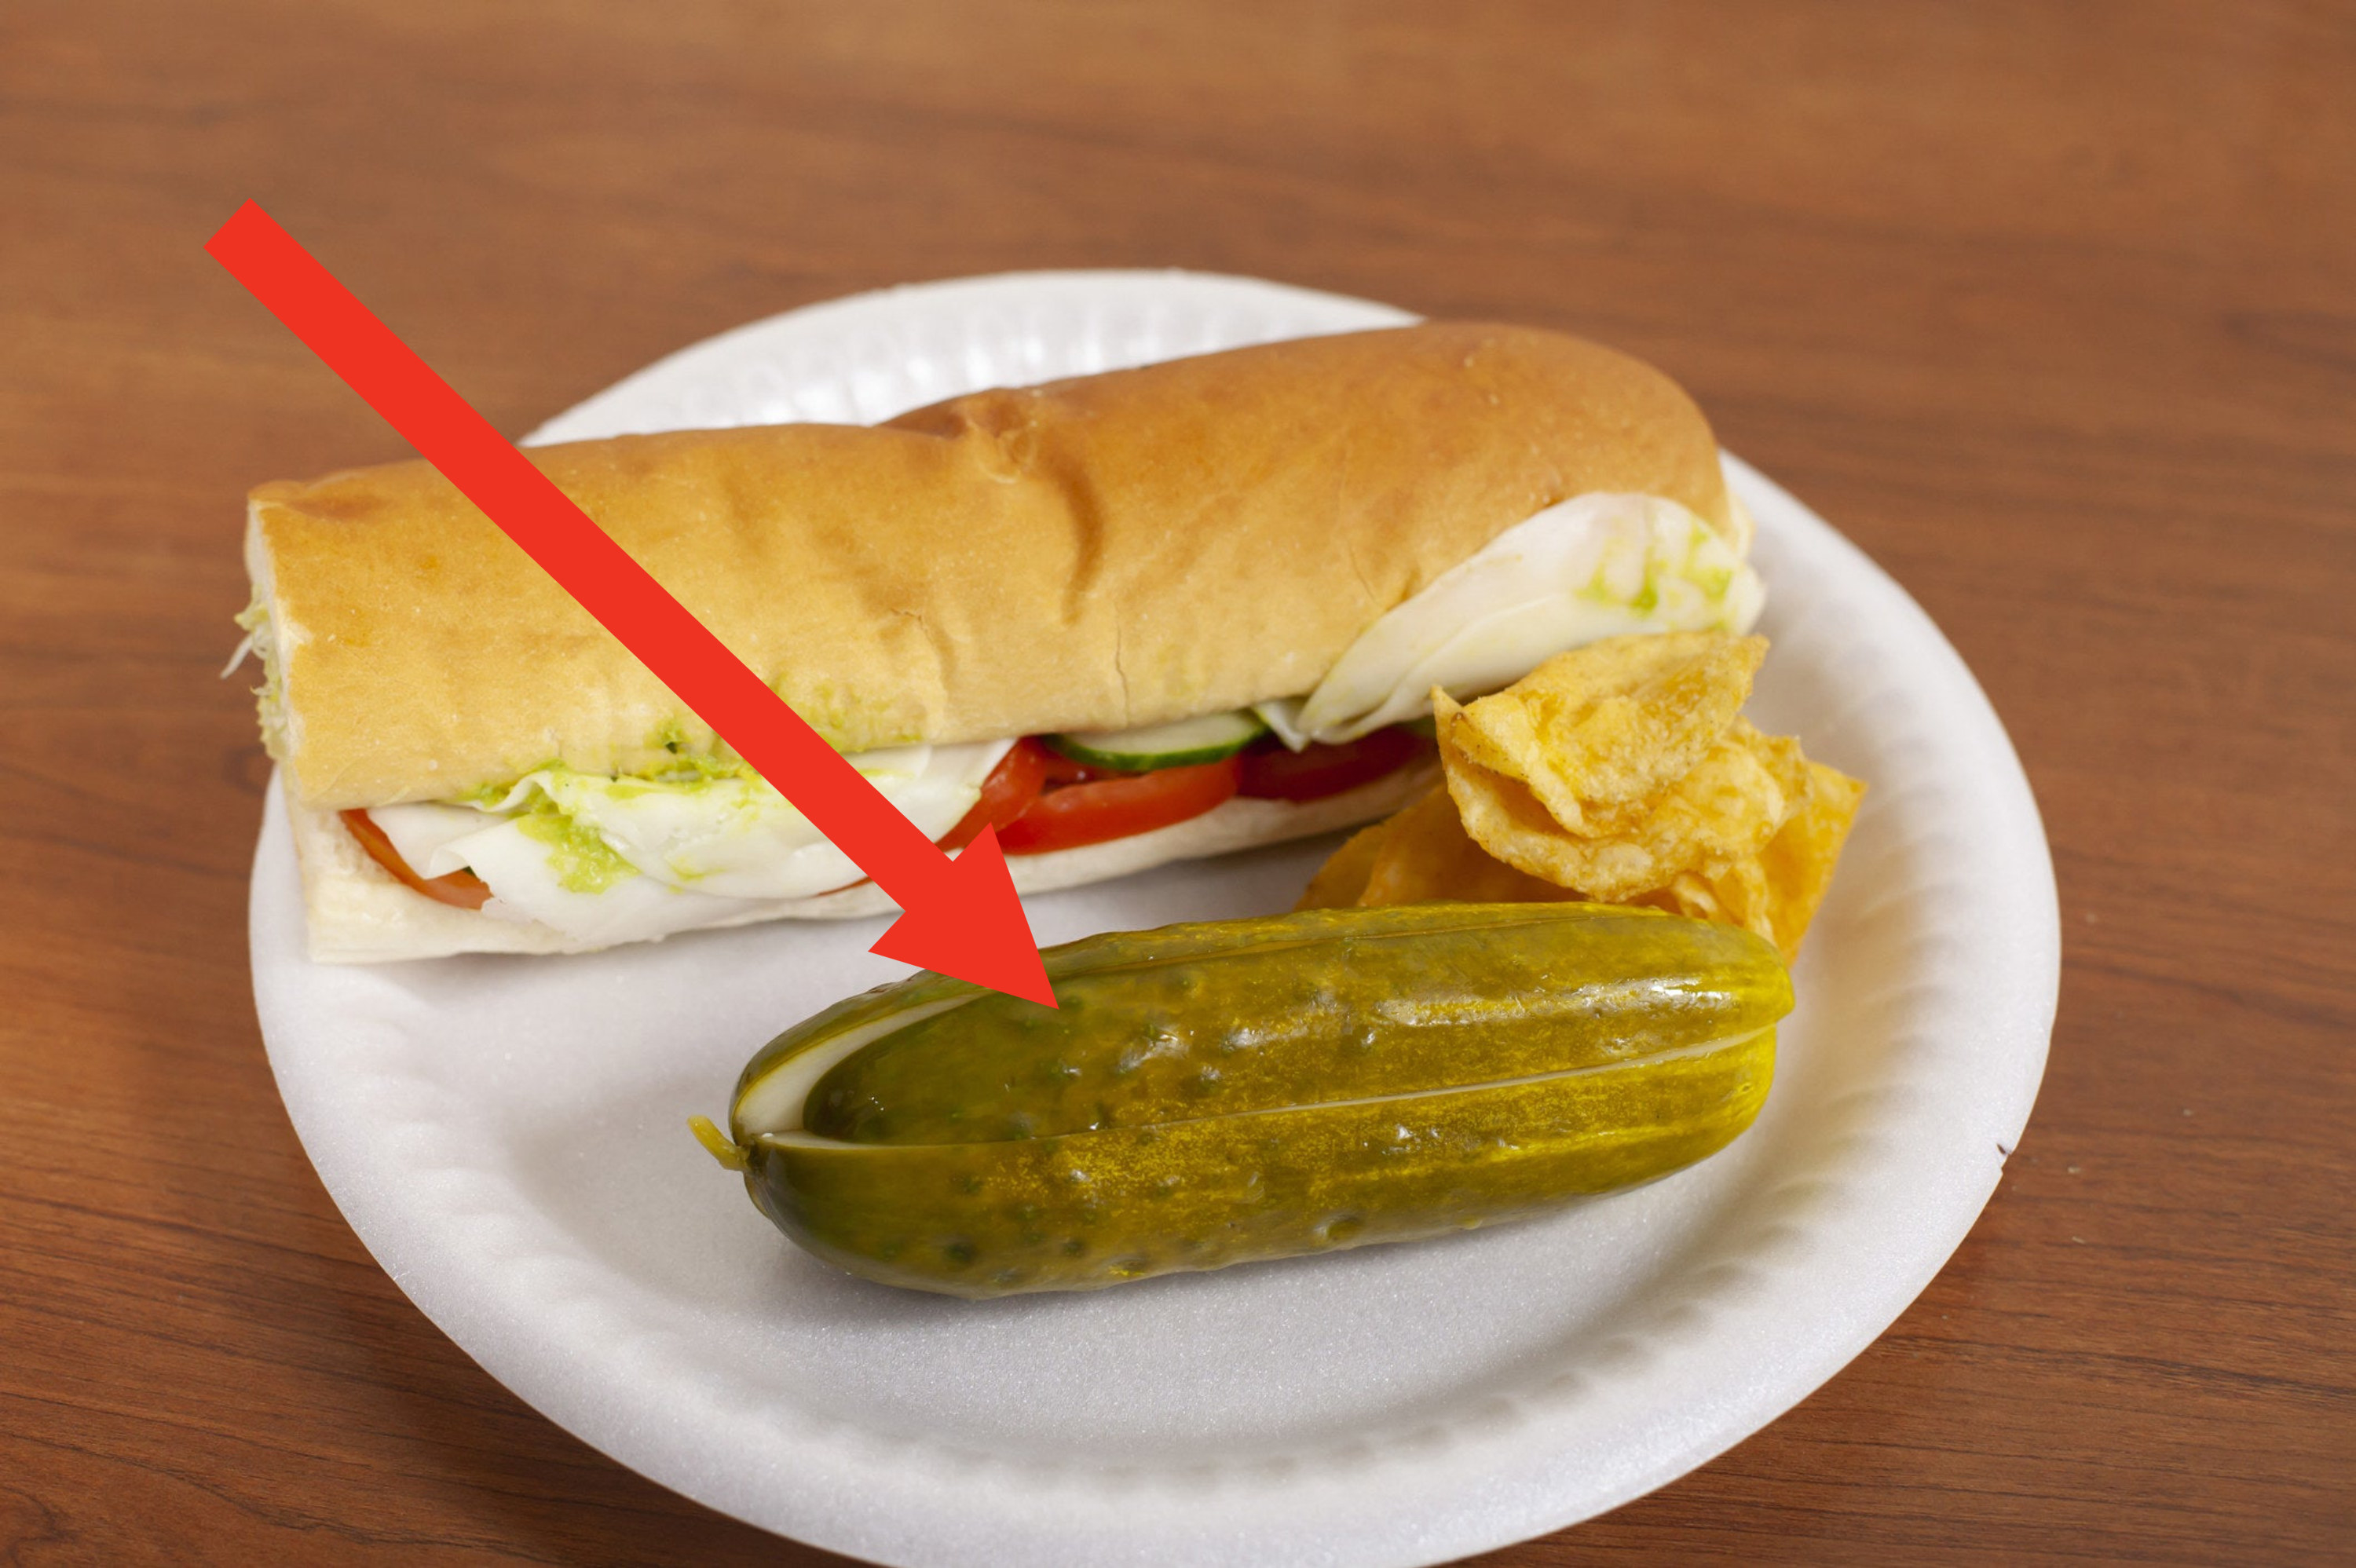 A sandwich with a pickle.